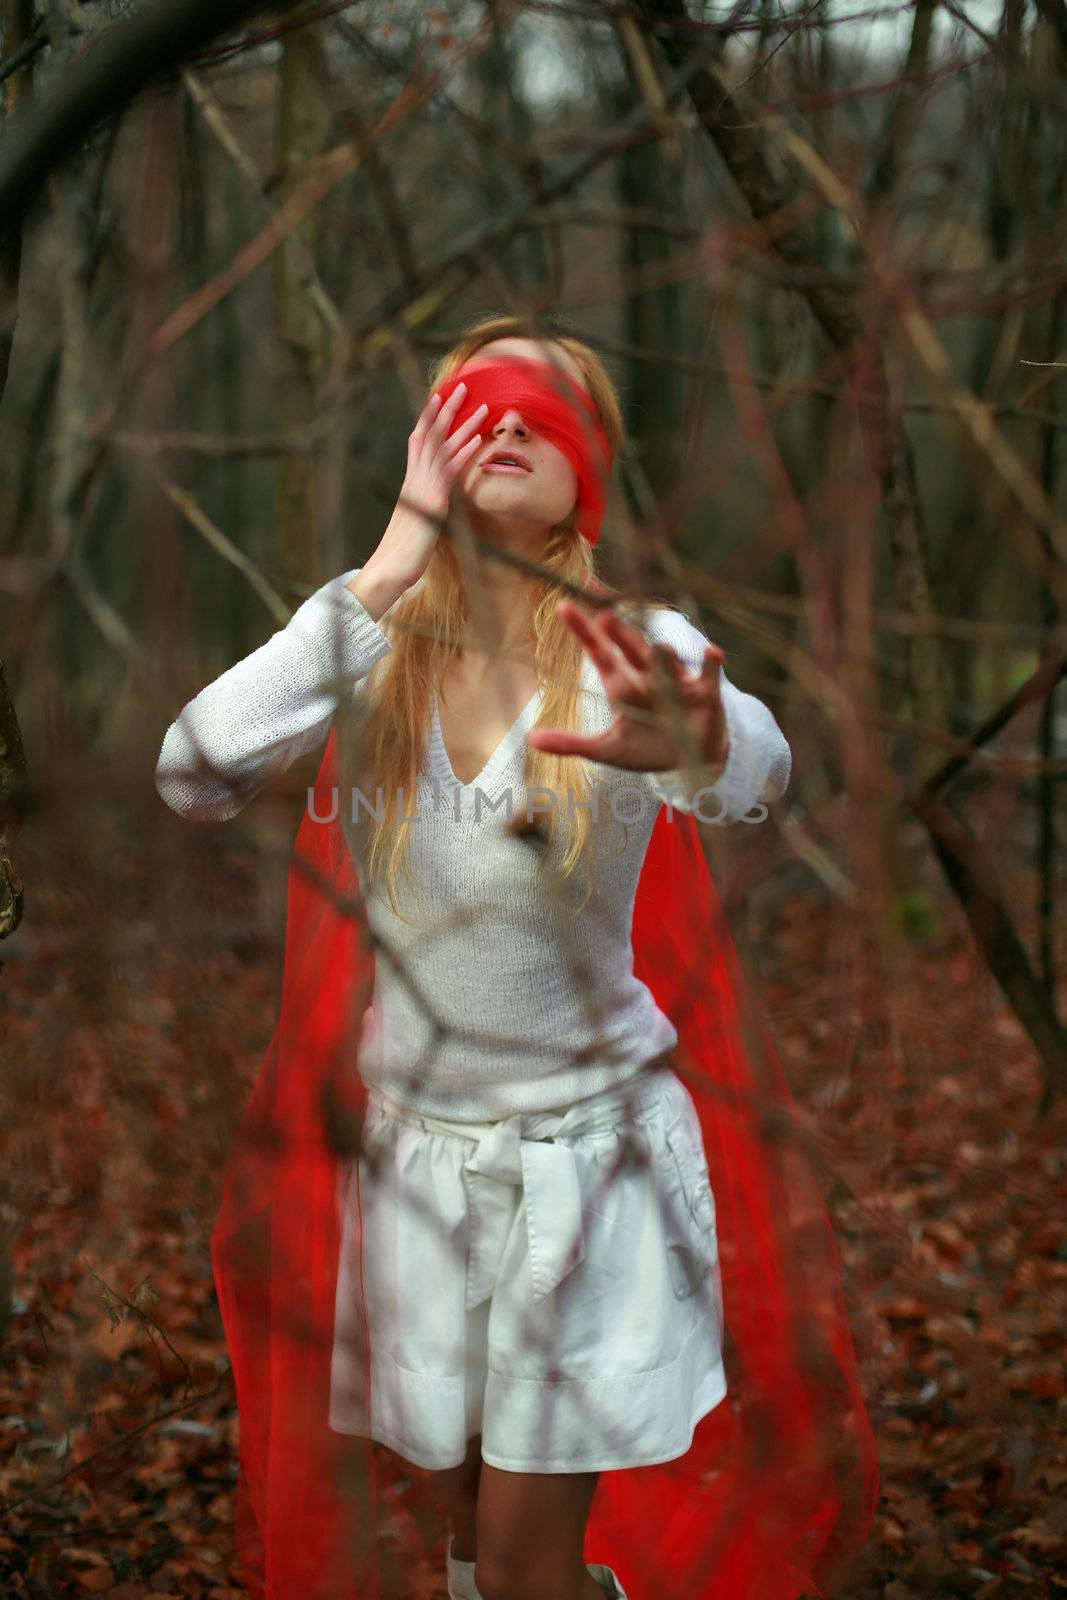 An image of blindfolded woman in dark forest